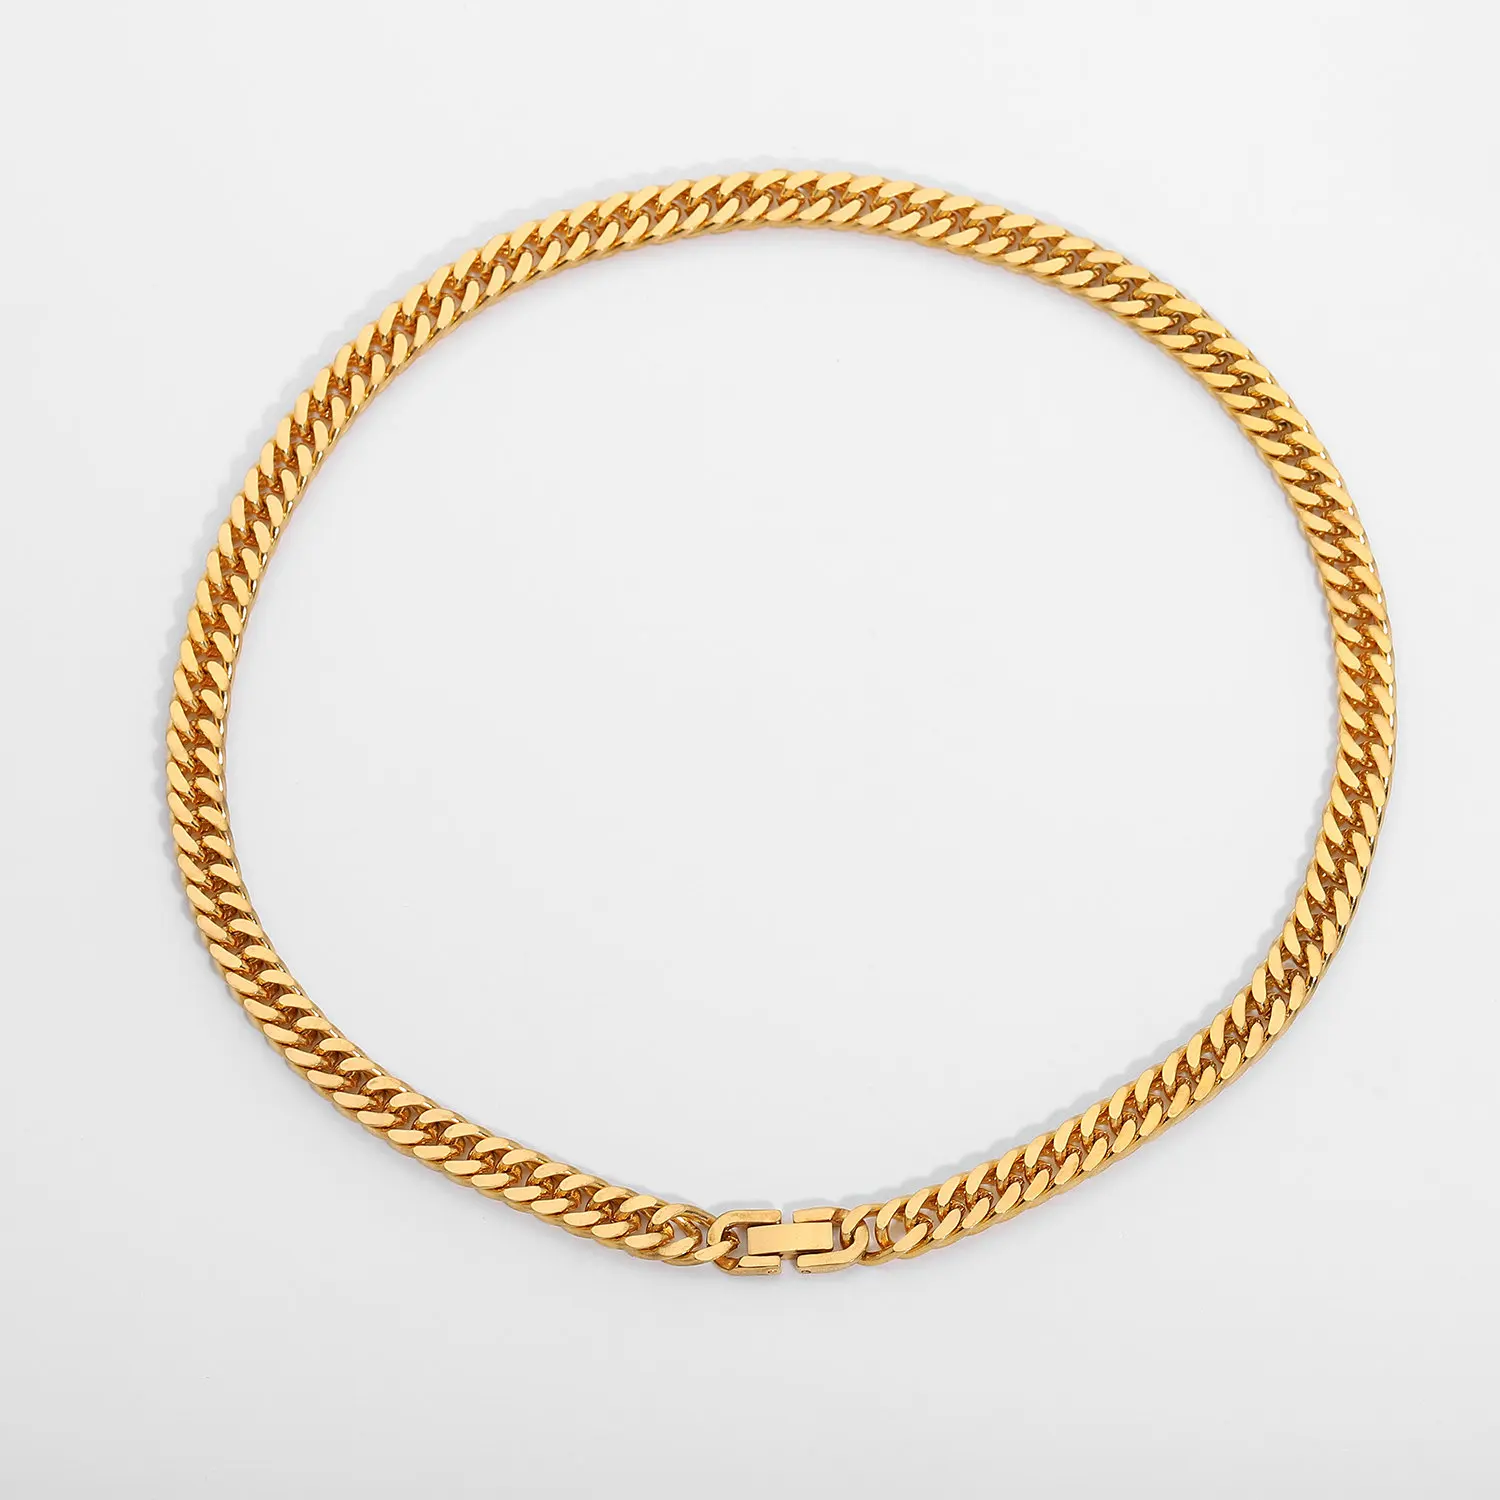 7.3mm Chunky gold Cuban Chain Necklace for women 18K Gold Plated Stainless Steel Miami Link Chain Choker Necklace